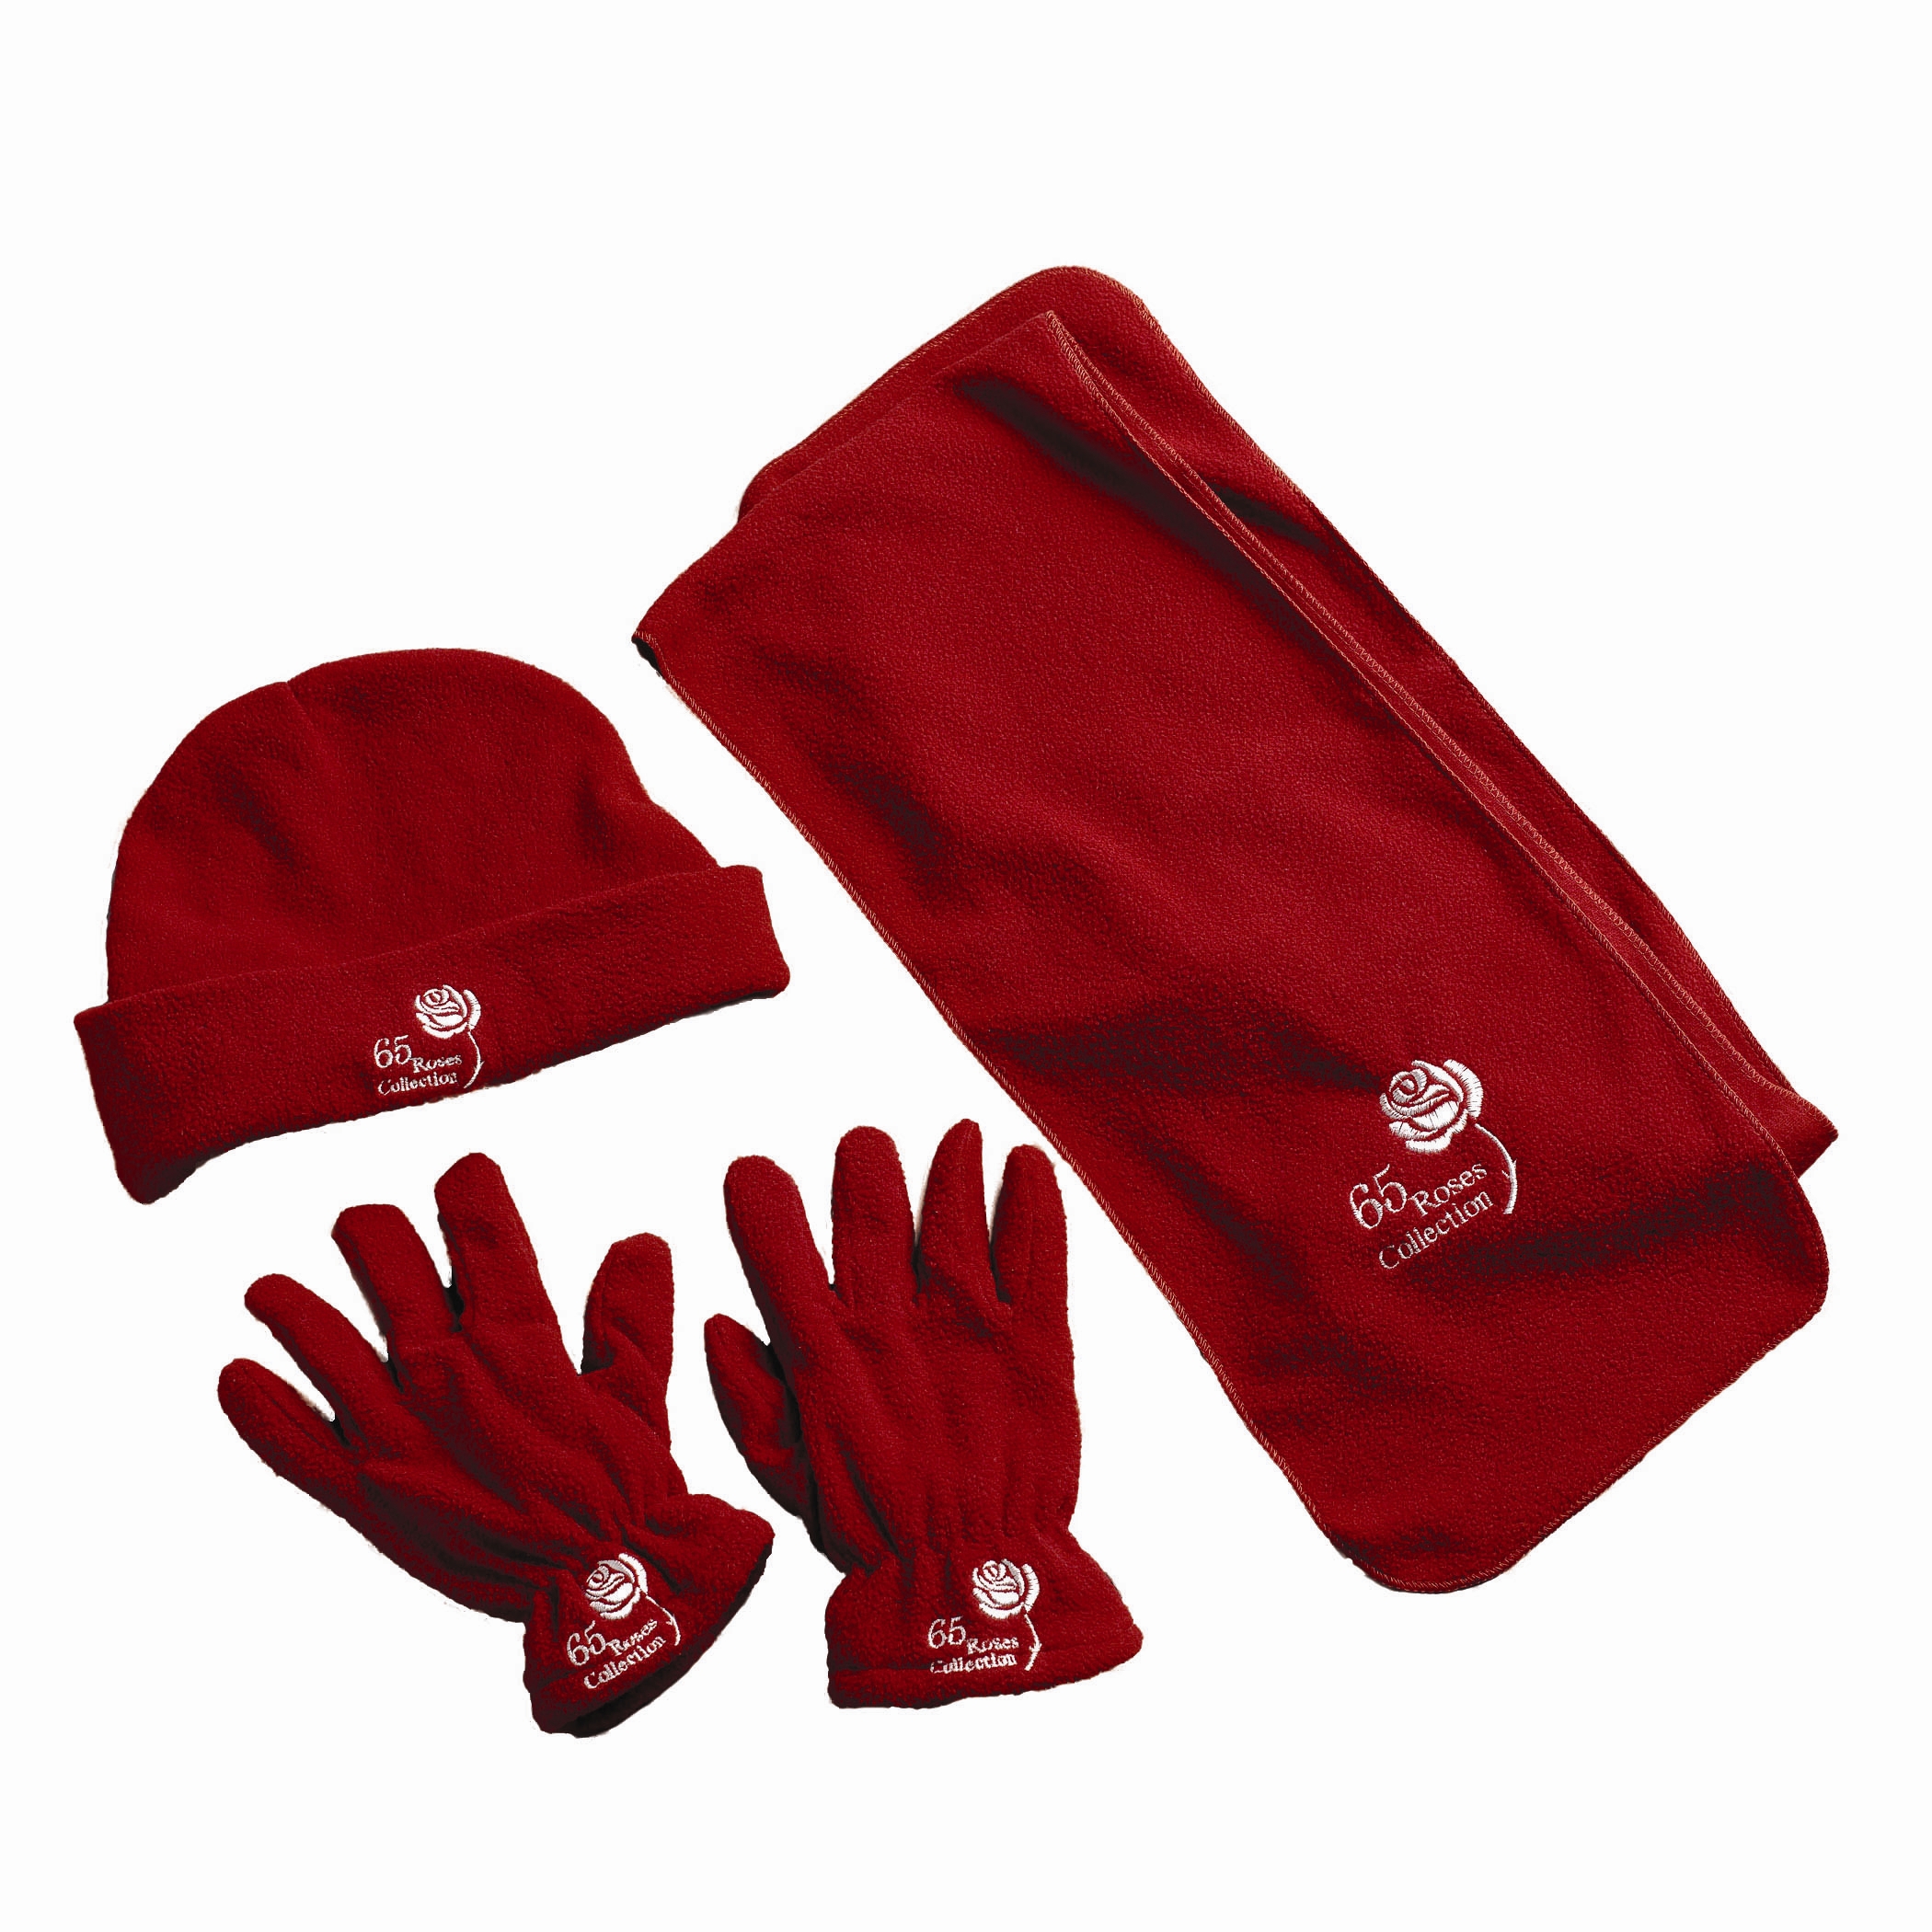 Winter Hat And Gloves Clipart   Clipart Panda   Free Clipart Images